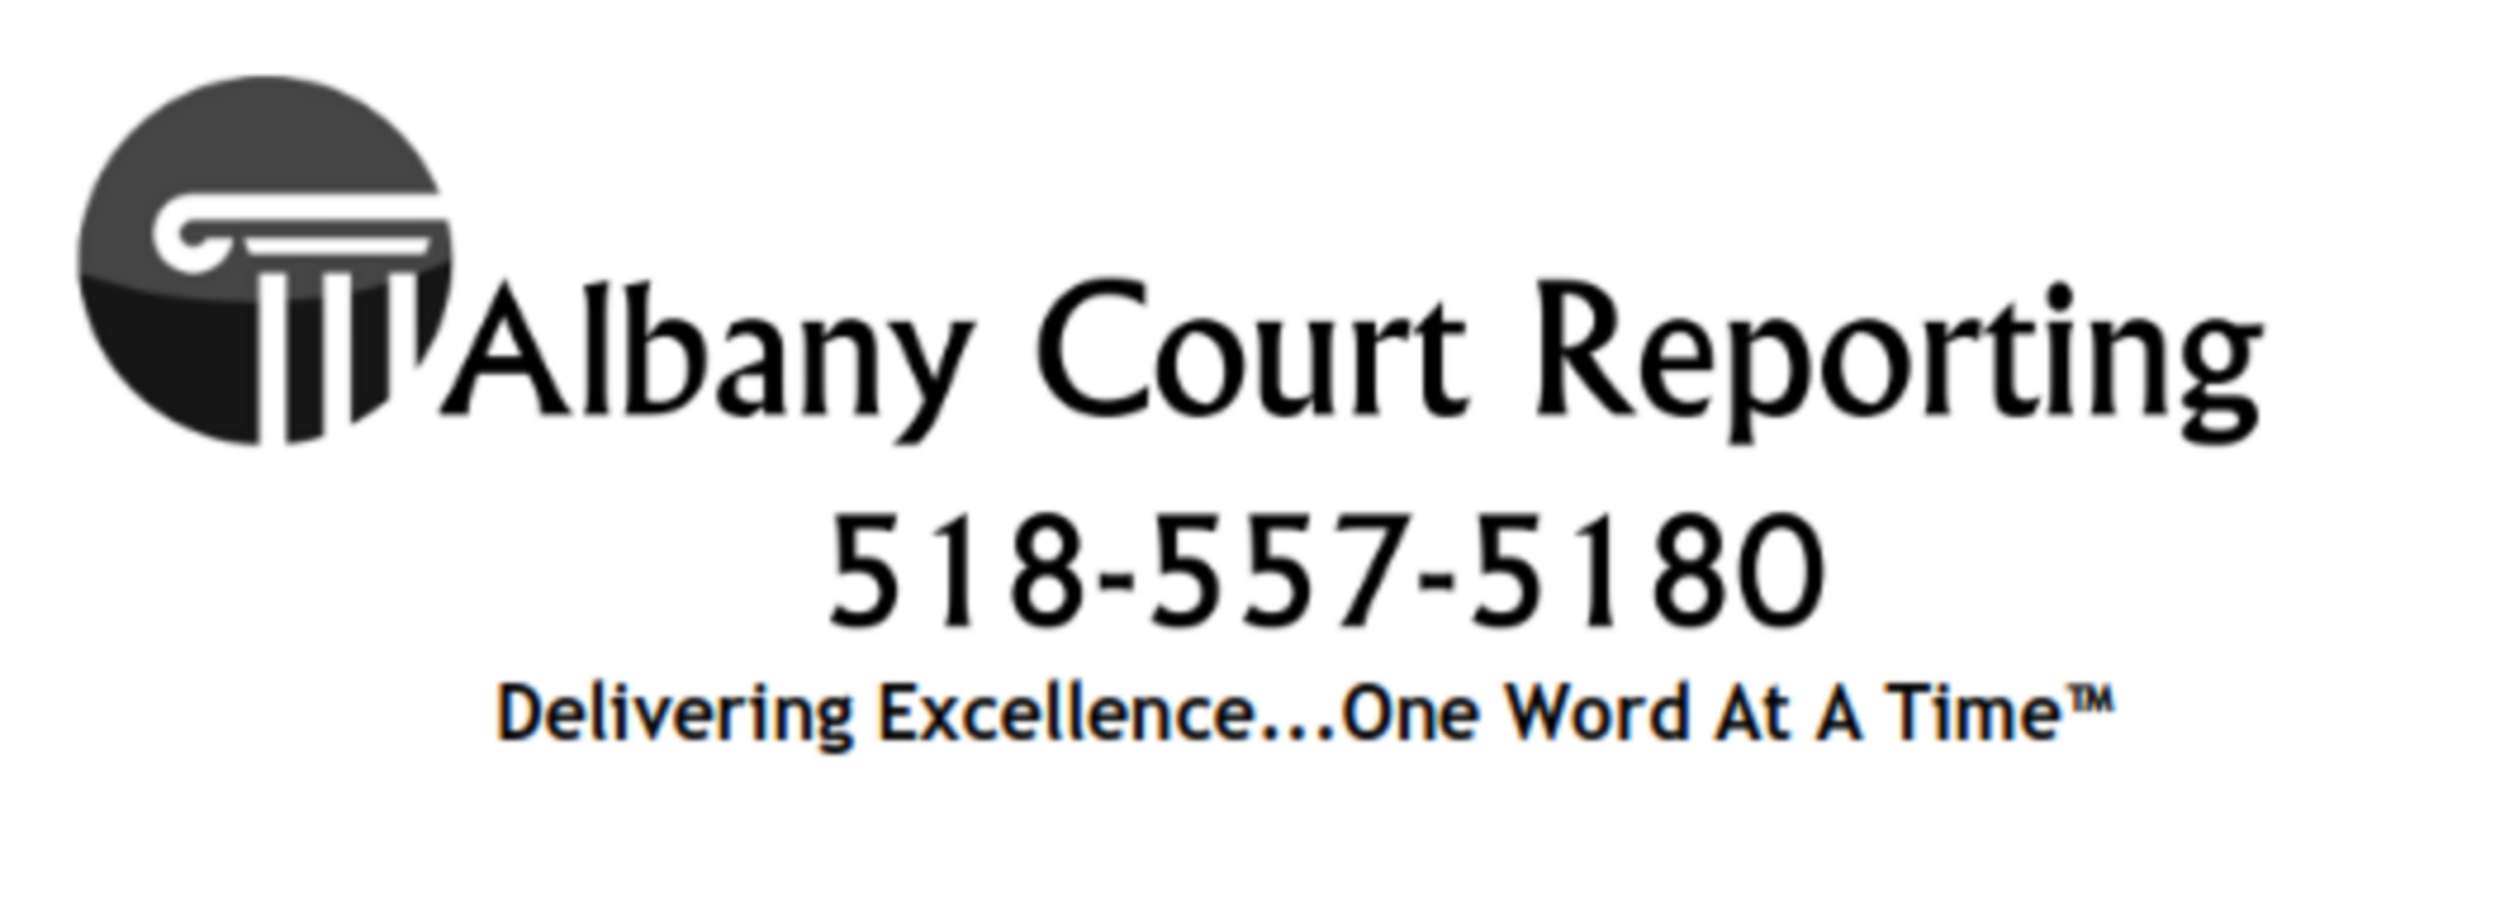 ALBANY COURT REPORTING